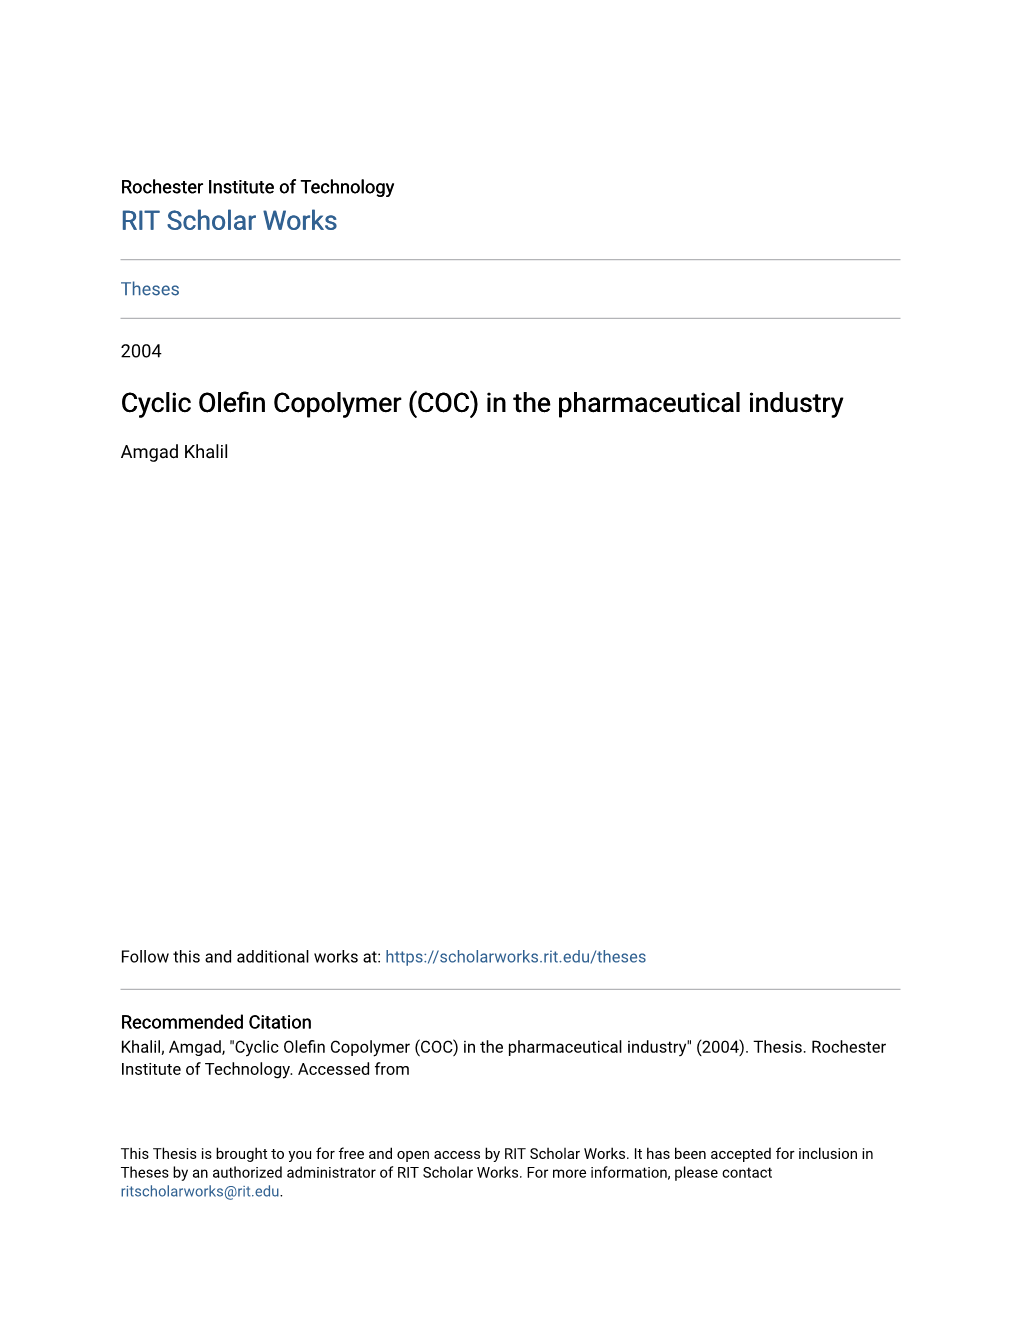 Cyclic Olefin Copolymer (COC) in the Pharmaceutical Industry